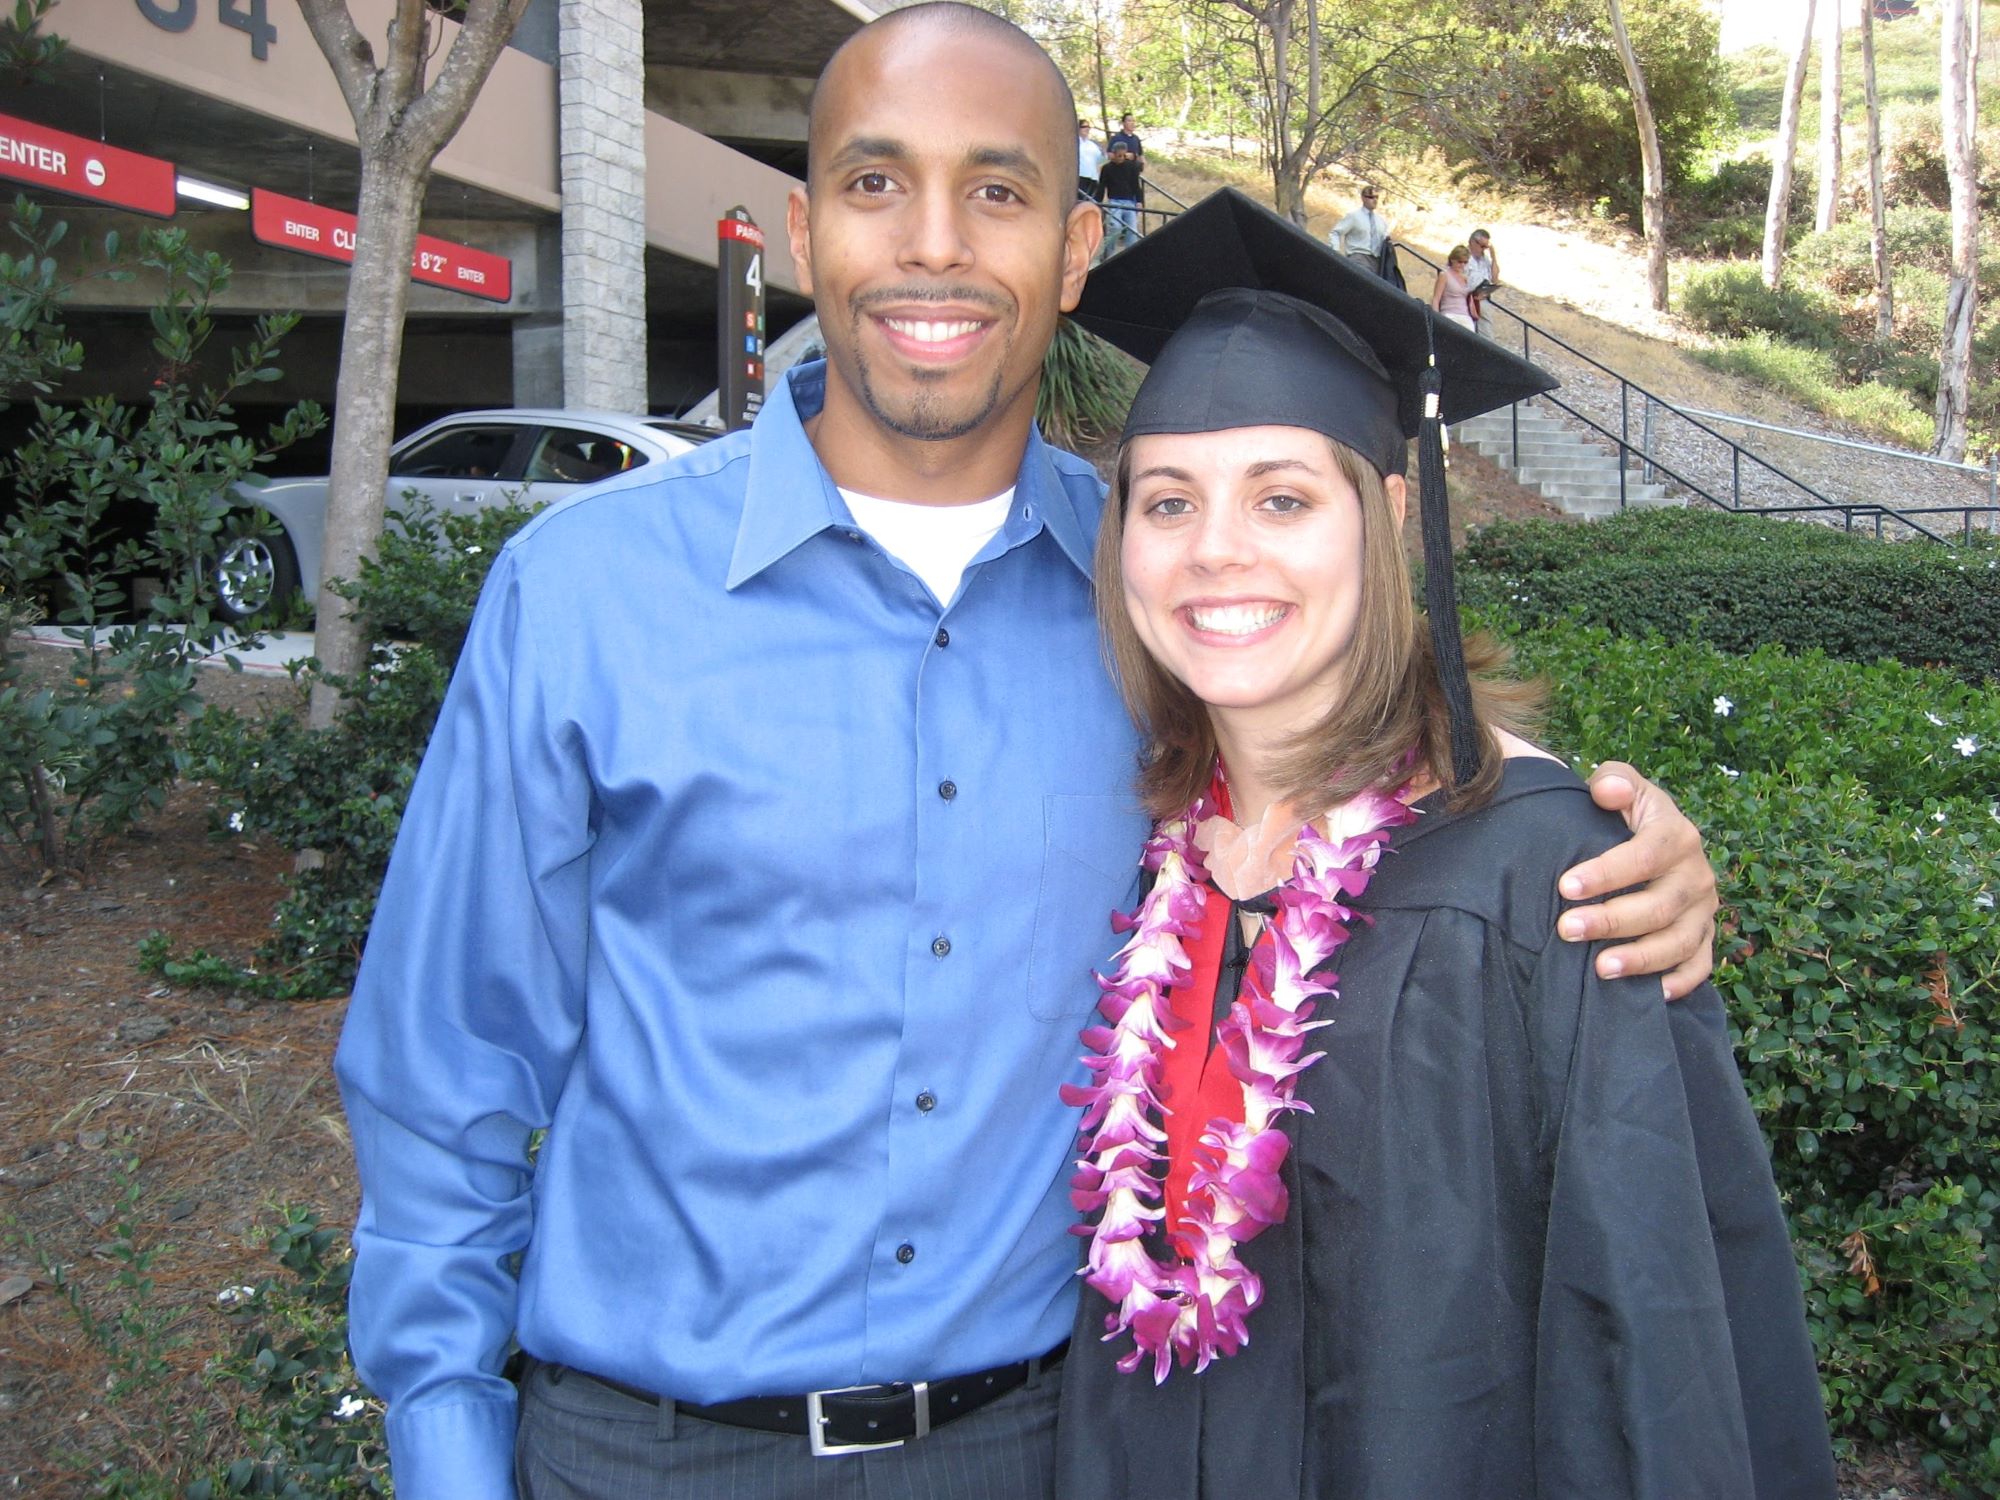 Adam and Ashley Riggs-Zeigen at Ashley’s SDSU commencement ceremony